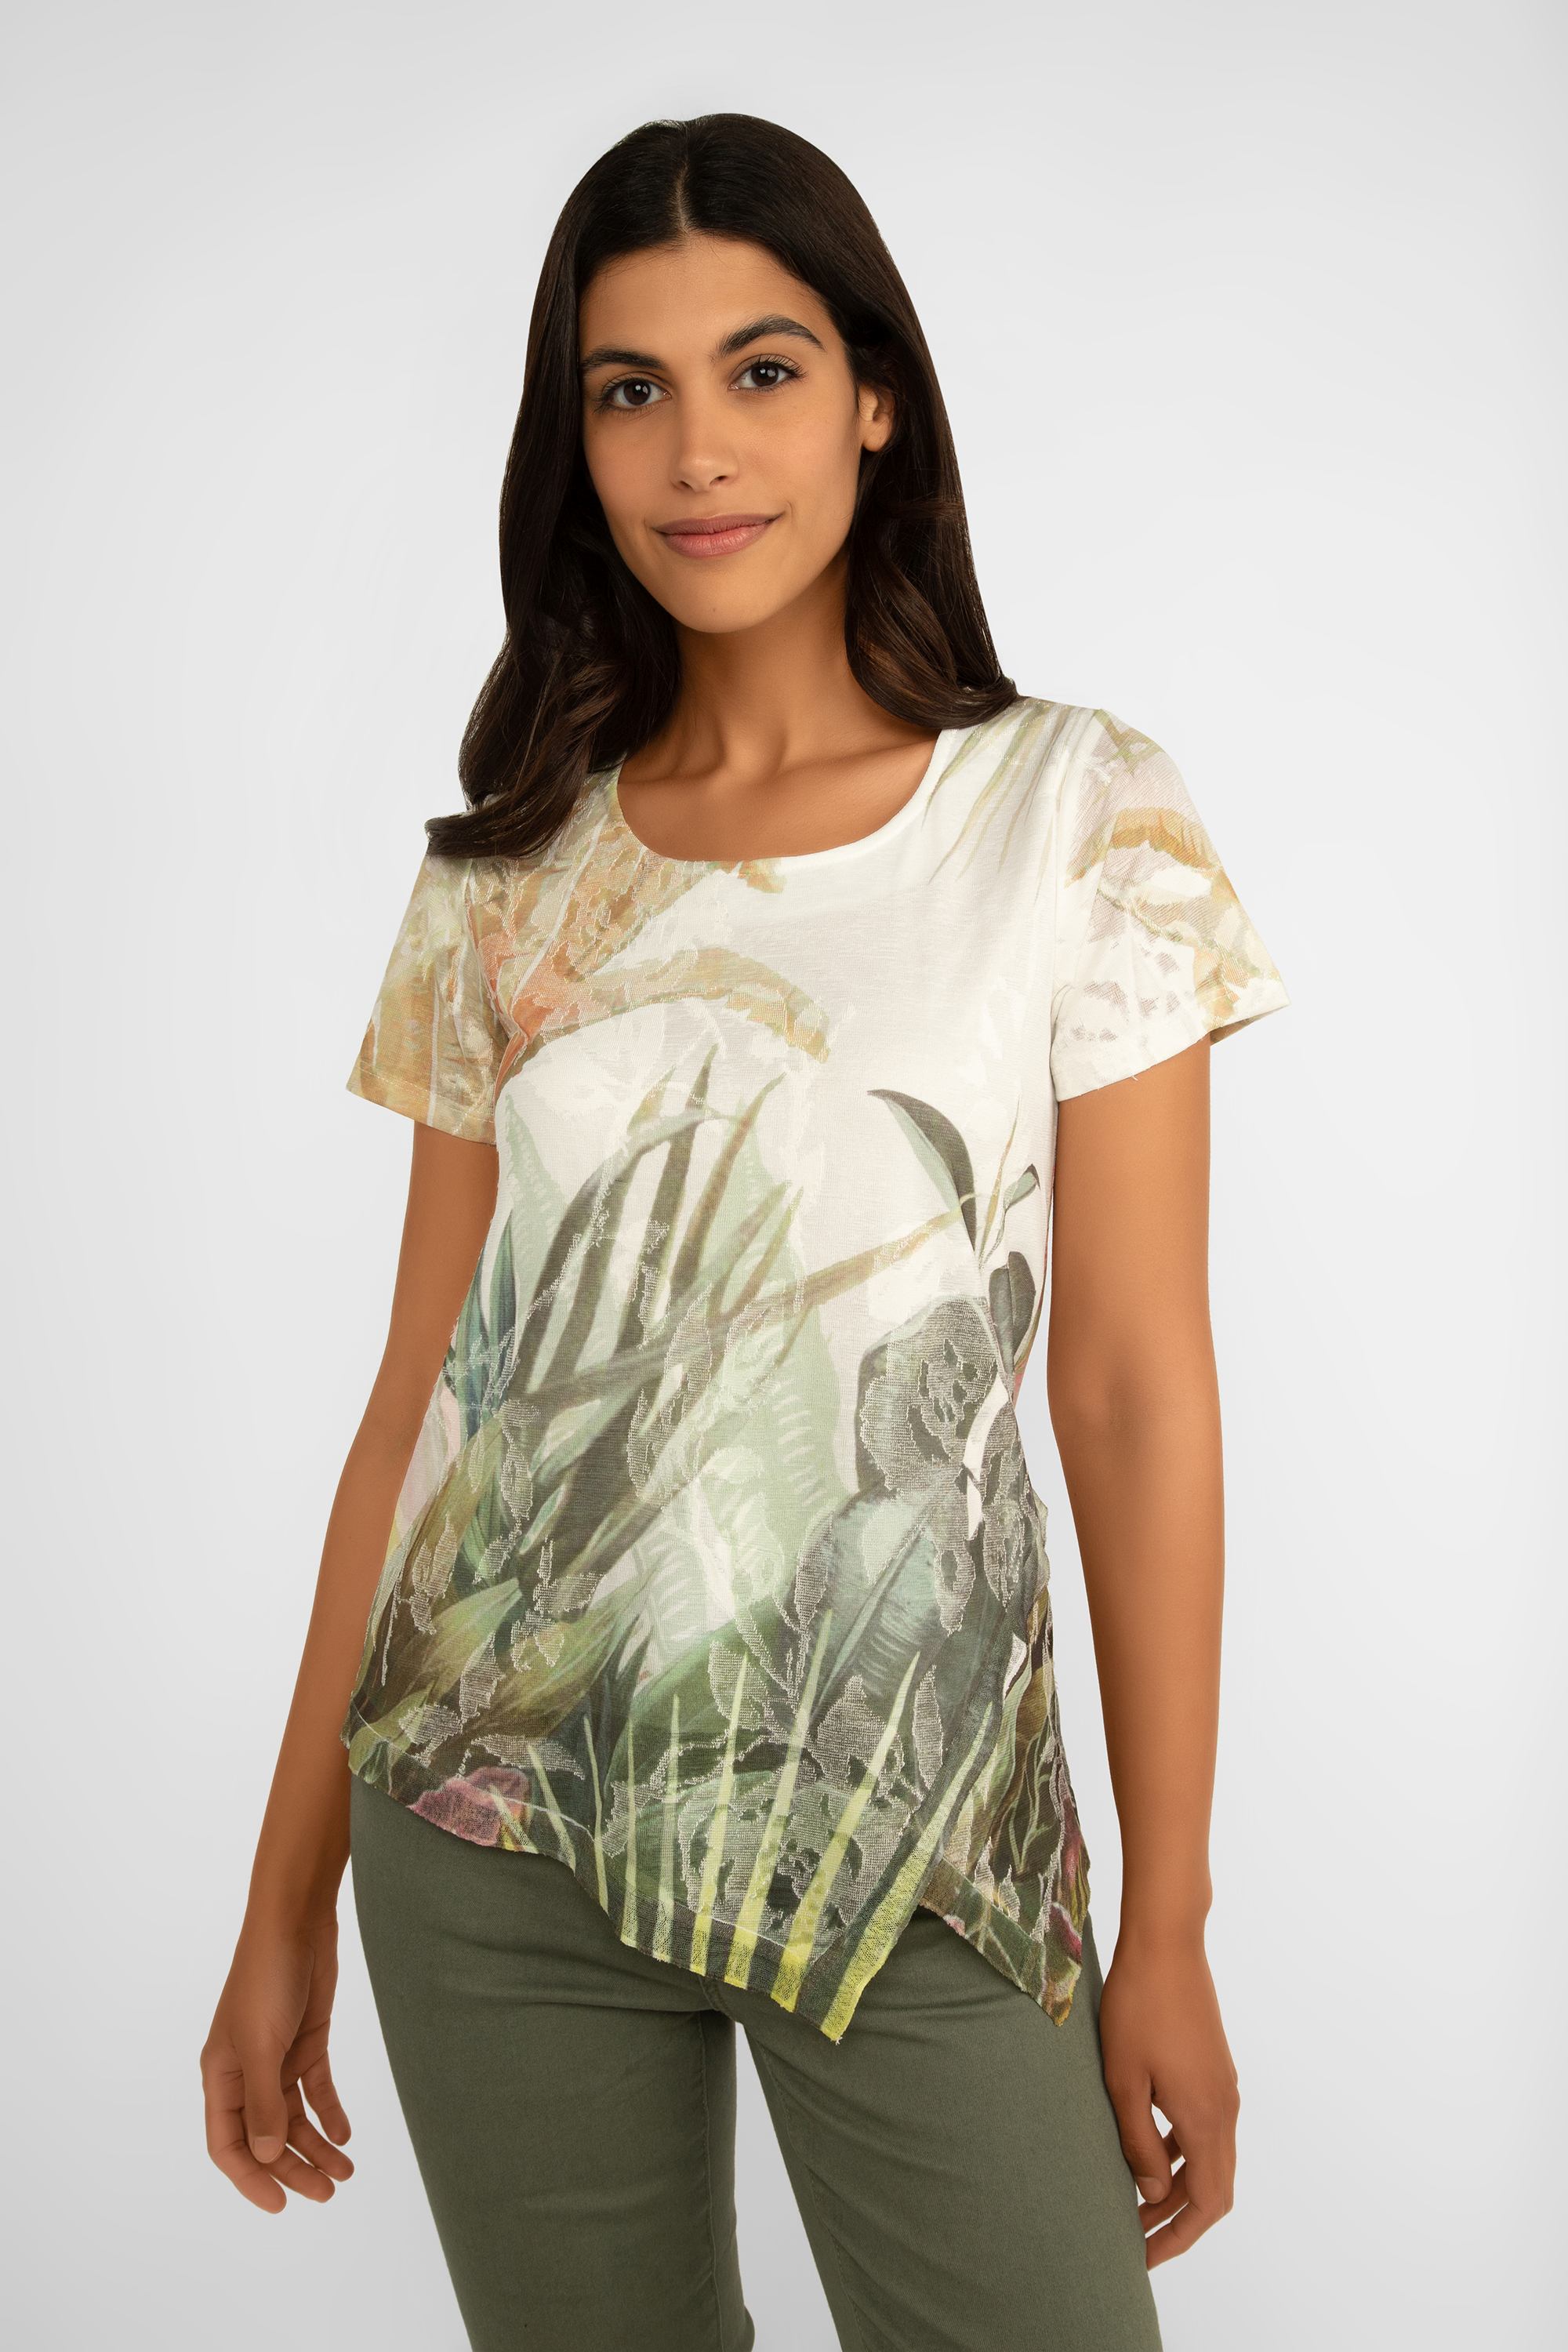 Picadilly (JC765SK) Women's Short Sleeve Asymmetrical Hem Top With an artichoke green foliage print over a cream background